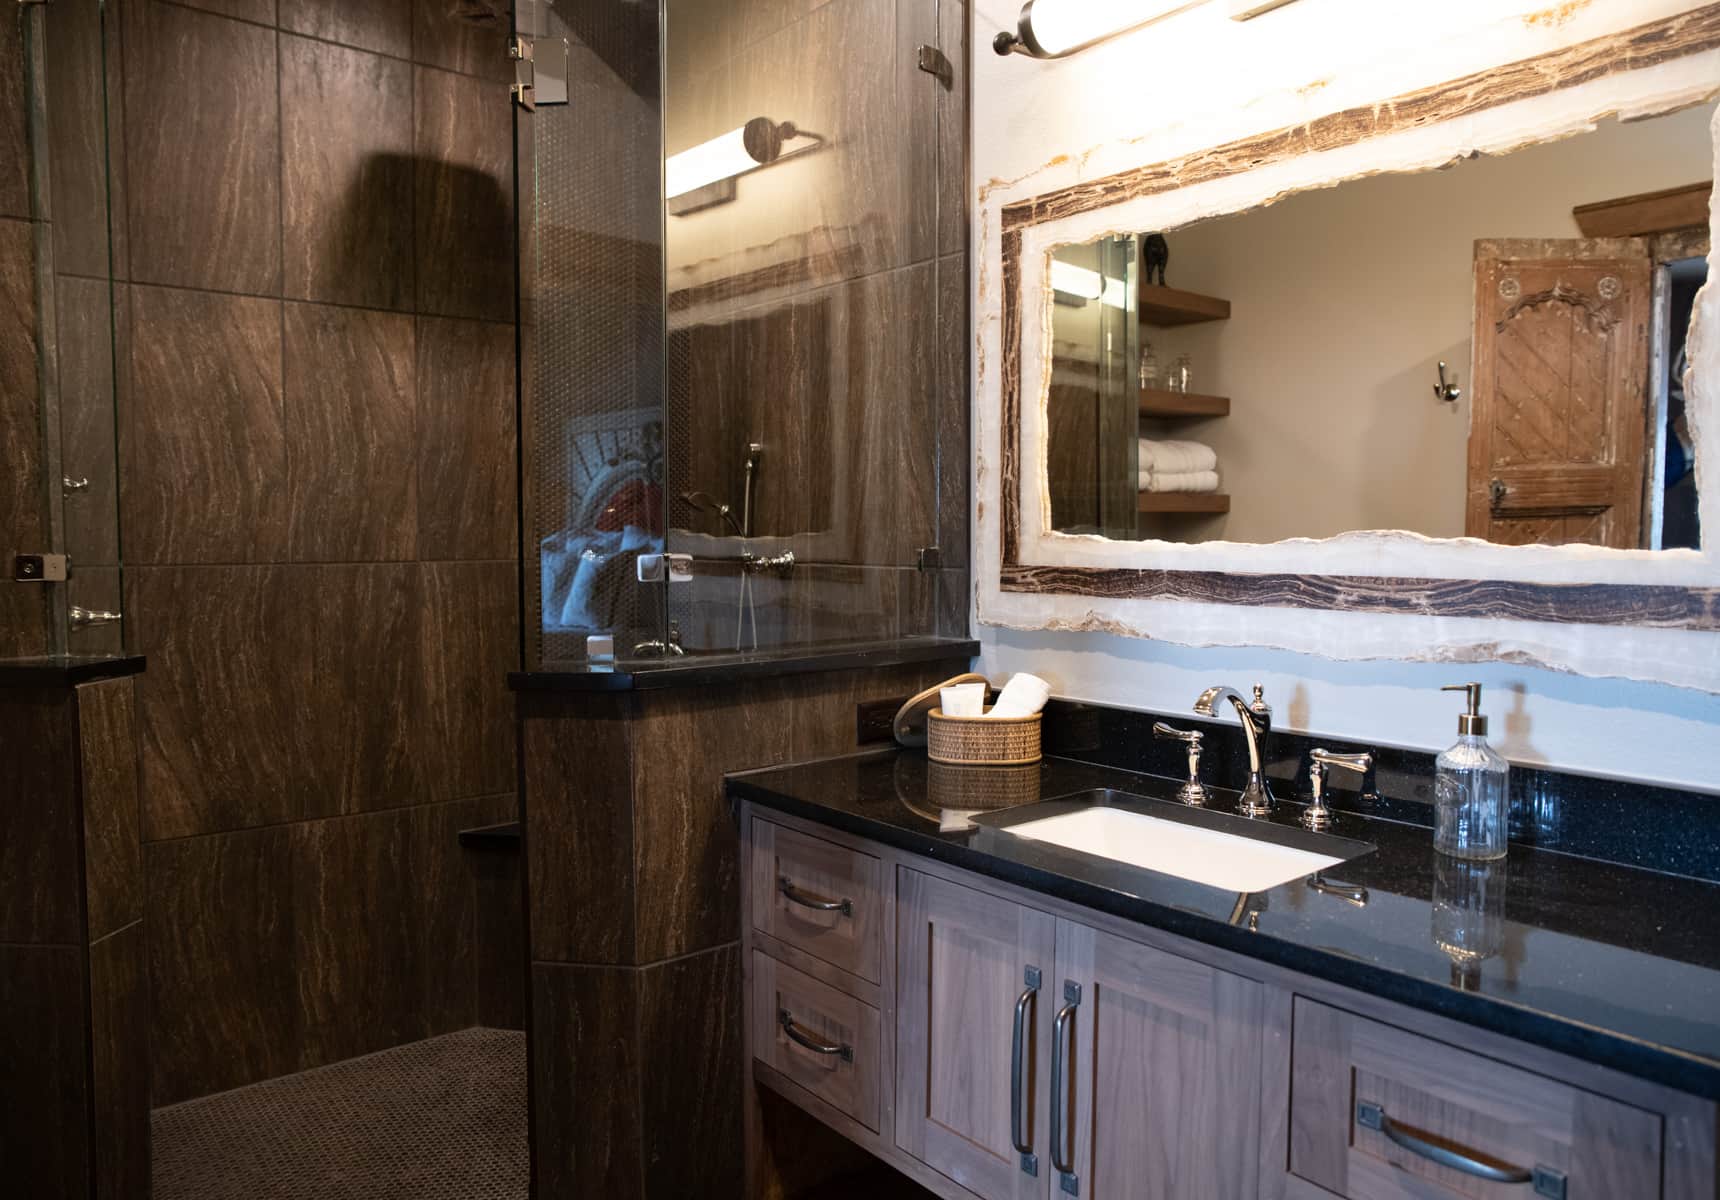 Bathroom with a walk-in shower, a counter and large mirror